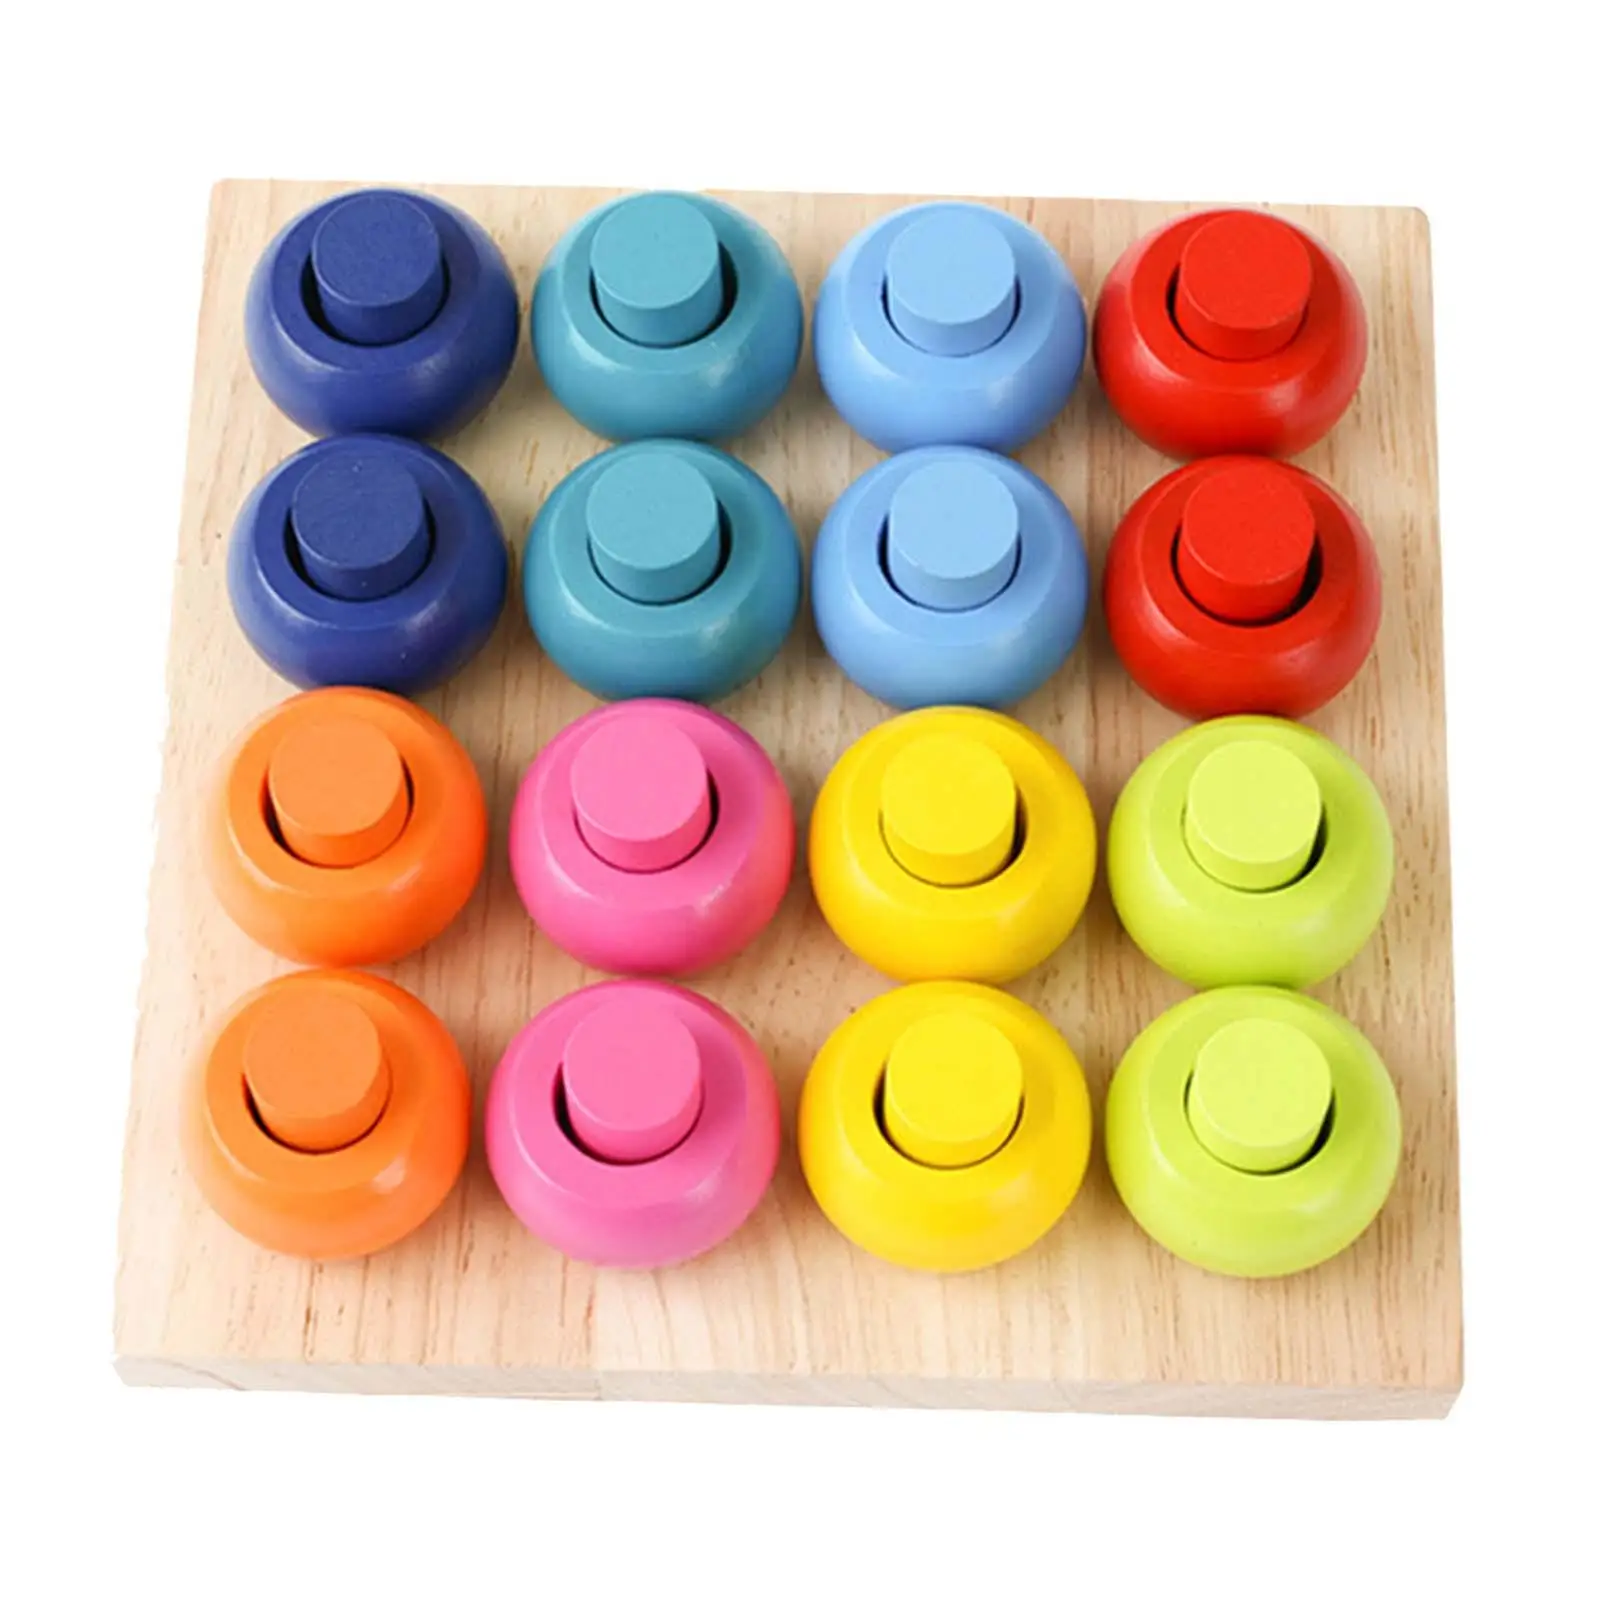 Wooden Stacking Peg Board Color Matching Wood Blocks Sorting Puzzle Sorter Stacker Learning Counting Toys Puzzle for Kids Baby